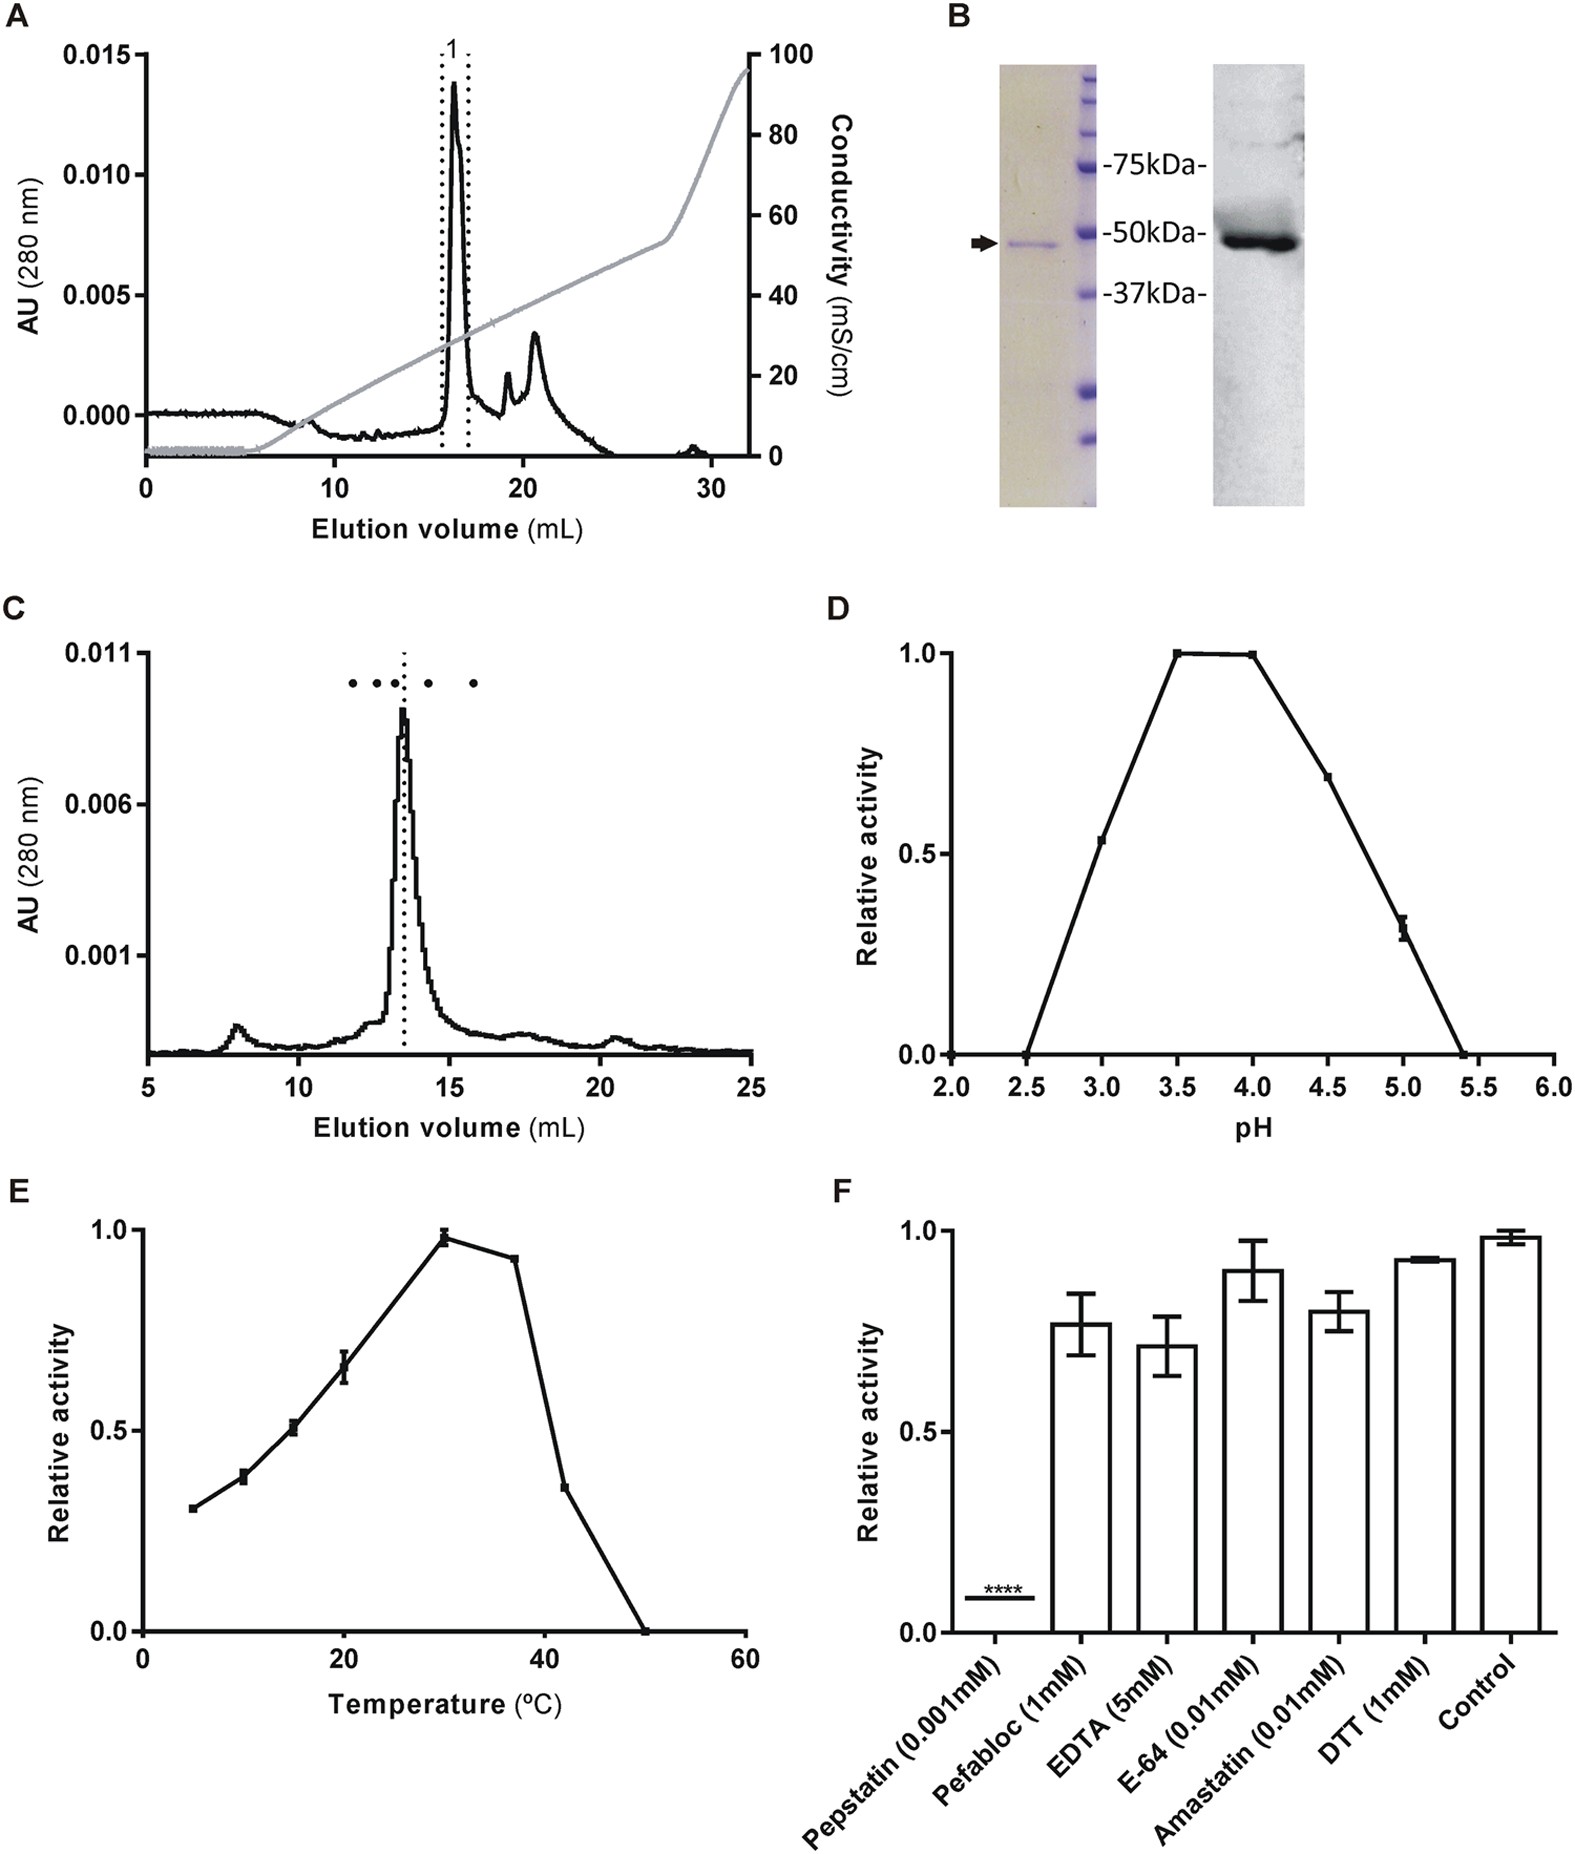 Enzymatic Properties Evidence For In Vivo Expression And Intracellular Localization Of Shewasin D The Pepsin Homolog From Shewanella Denitrificans Scientific Reports